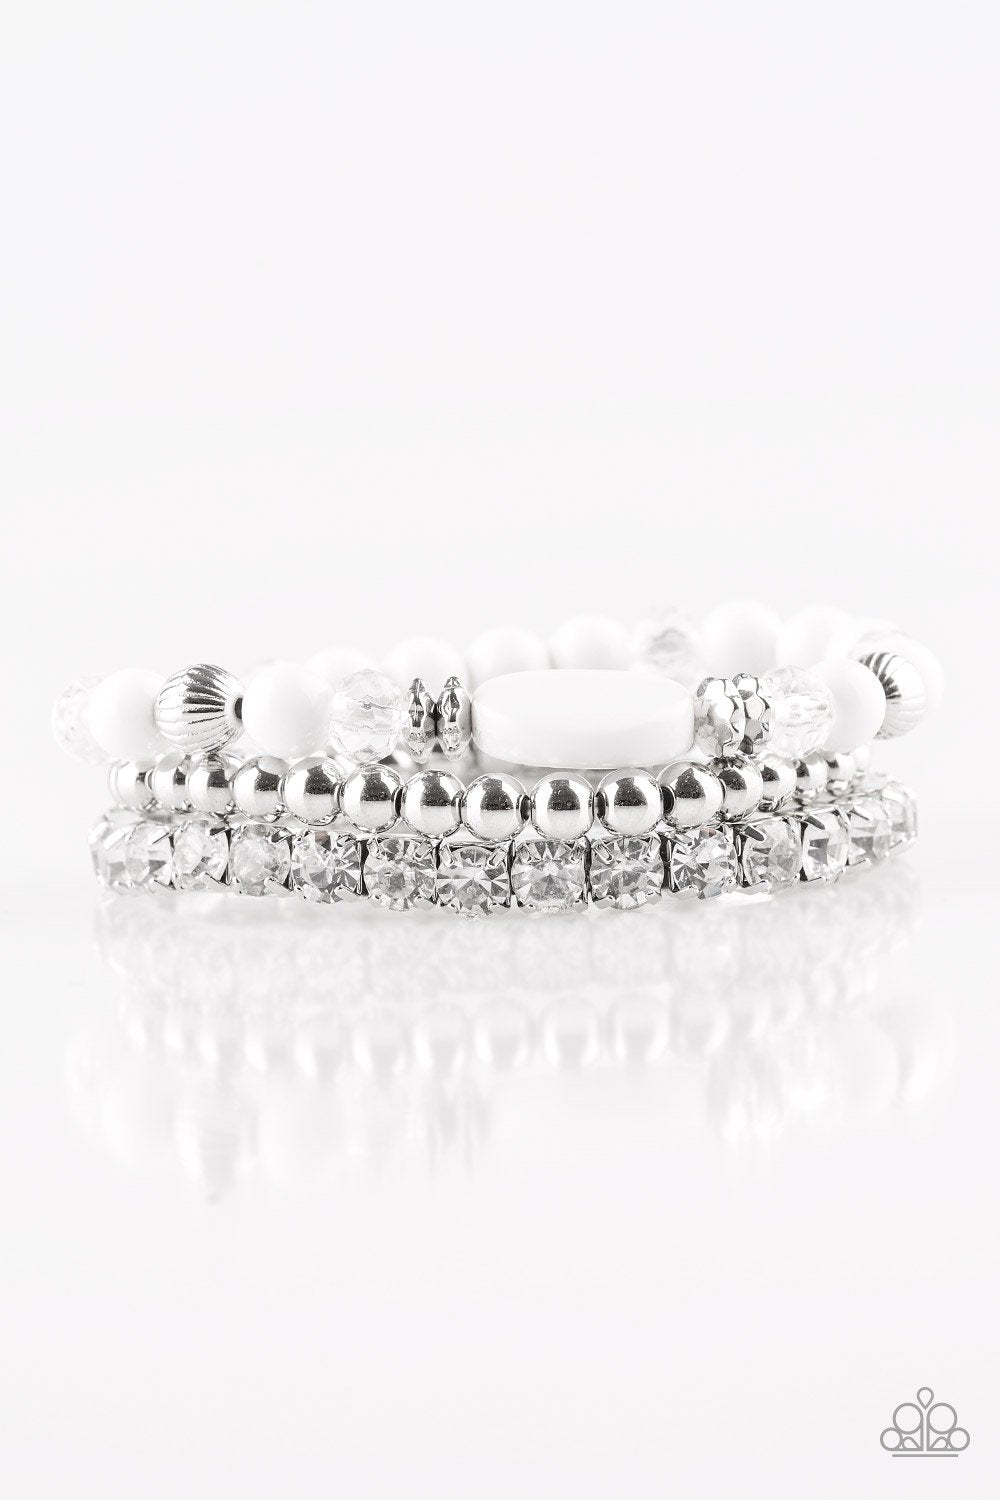 Modestly Madonna Silver and White Bracelet Set - Paparazzi Accessories-CarasShop.com - $5 Jewelry by Cara Jewels